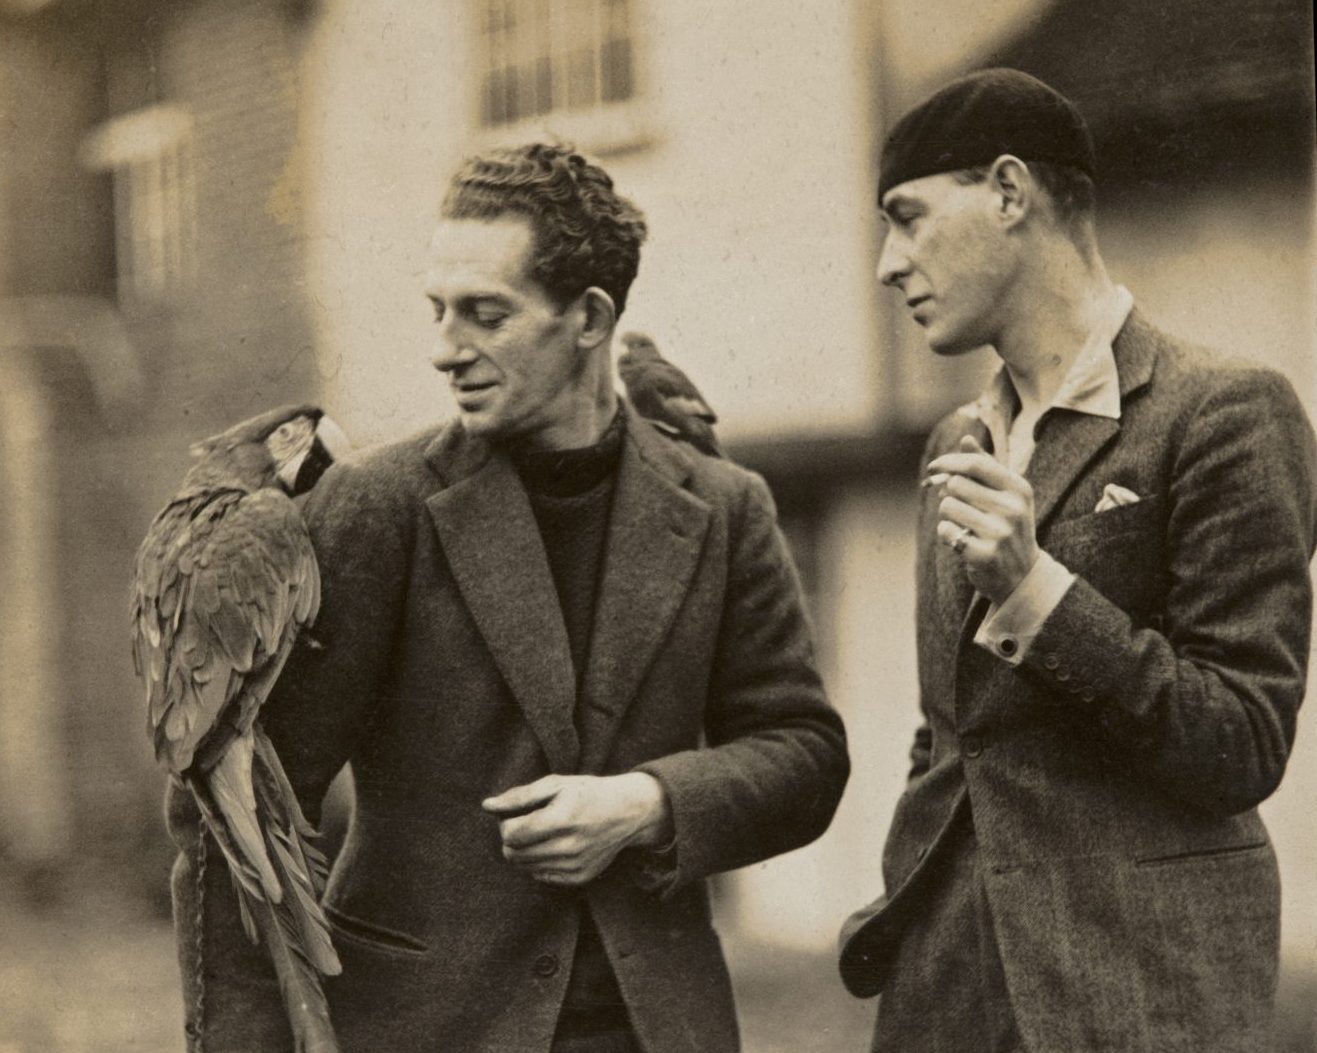 A sepia image of Cedric Morris and Arthur Lett-Haines. Cedric has a parrot on his shoulder and Lett-Haines is smoking a cigarette. They are both wearing suits.